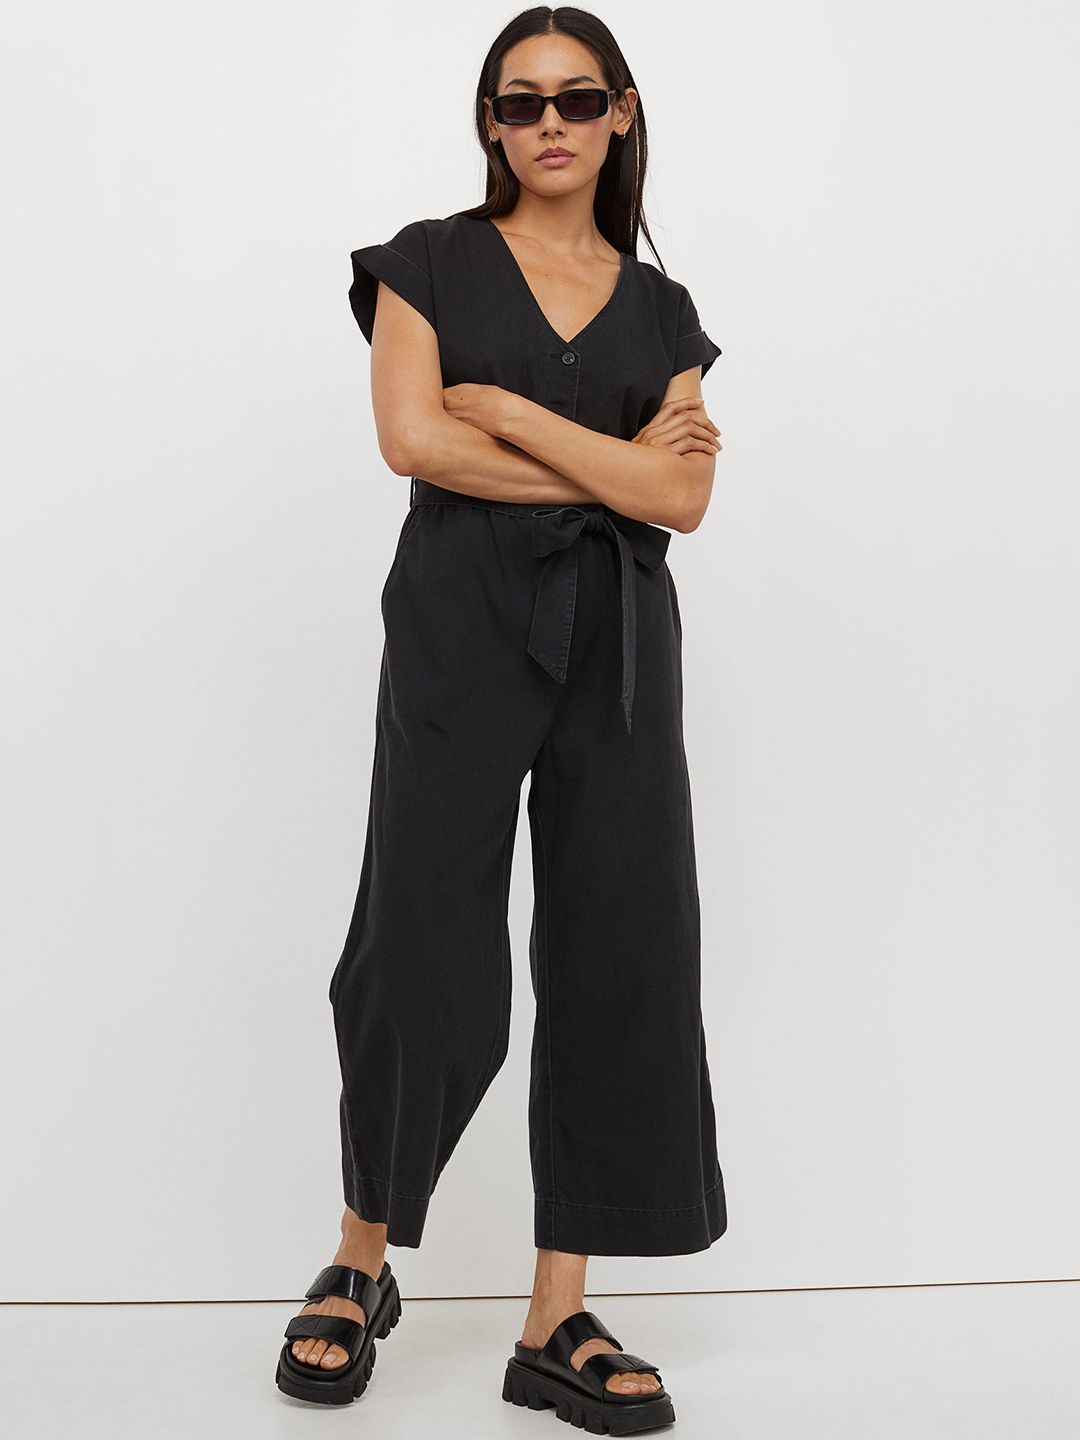 H&M Woman Black Lyocell jumpsuit Price in India